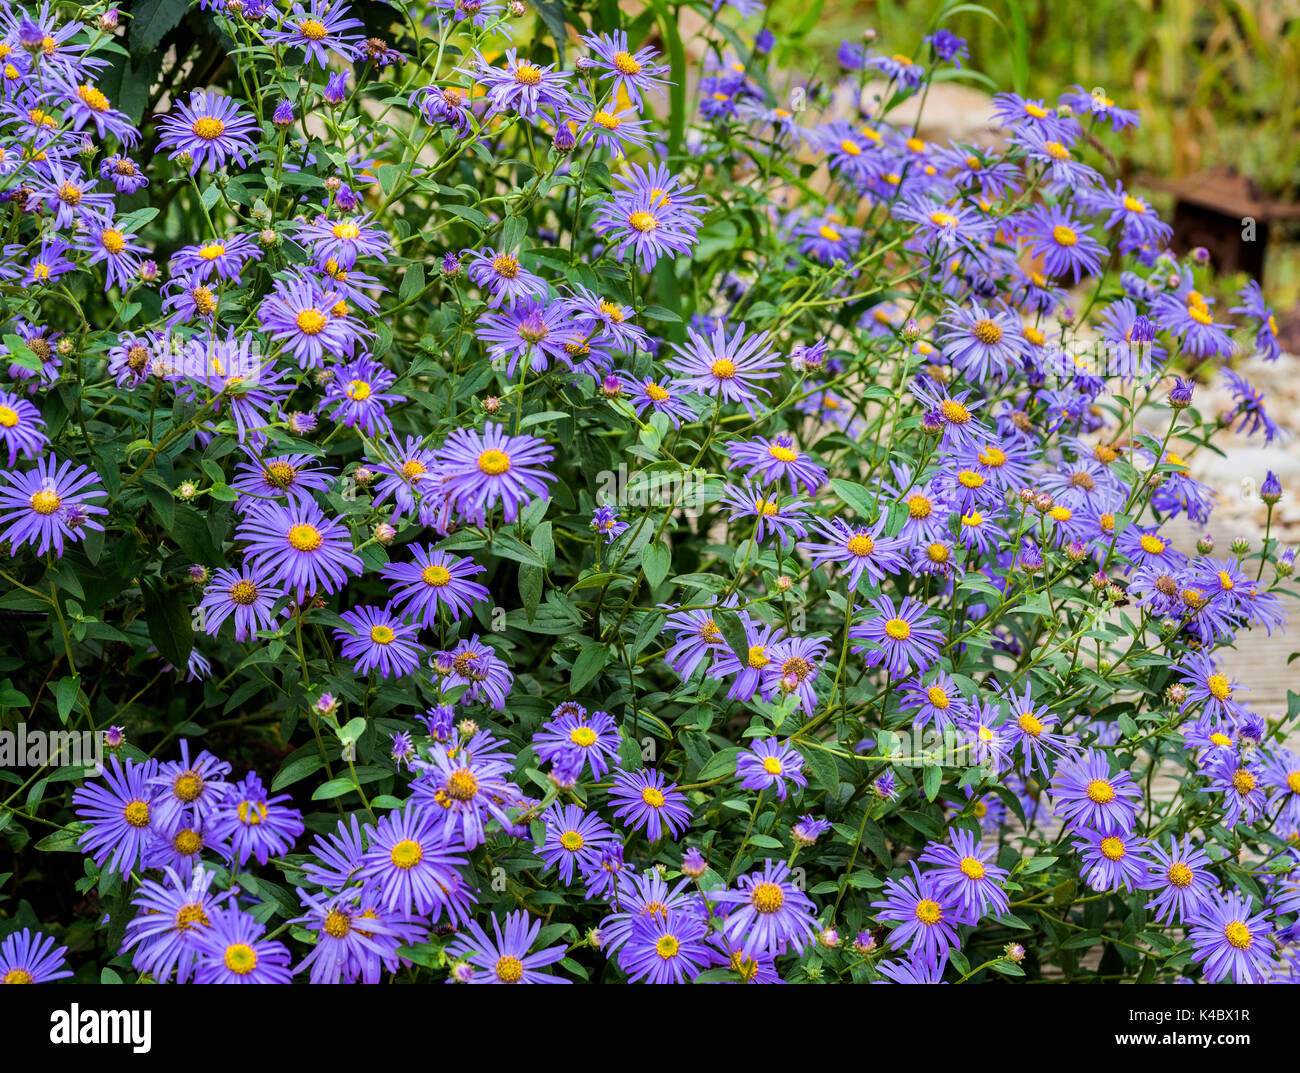 Aster frikartii Monch, Asteraceae. Stock Photo